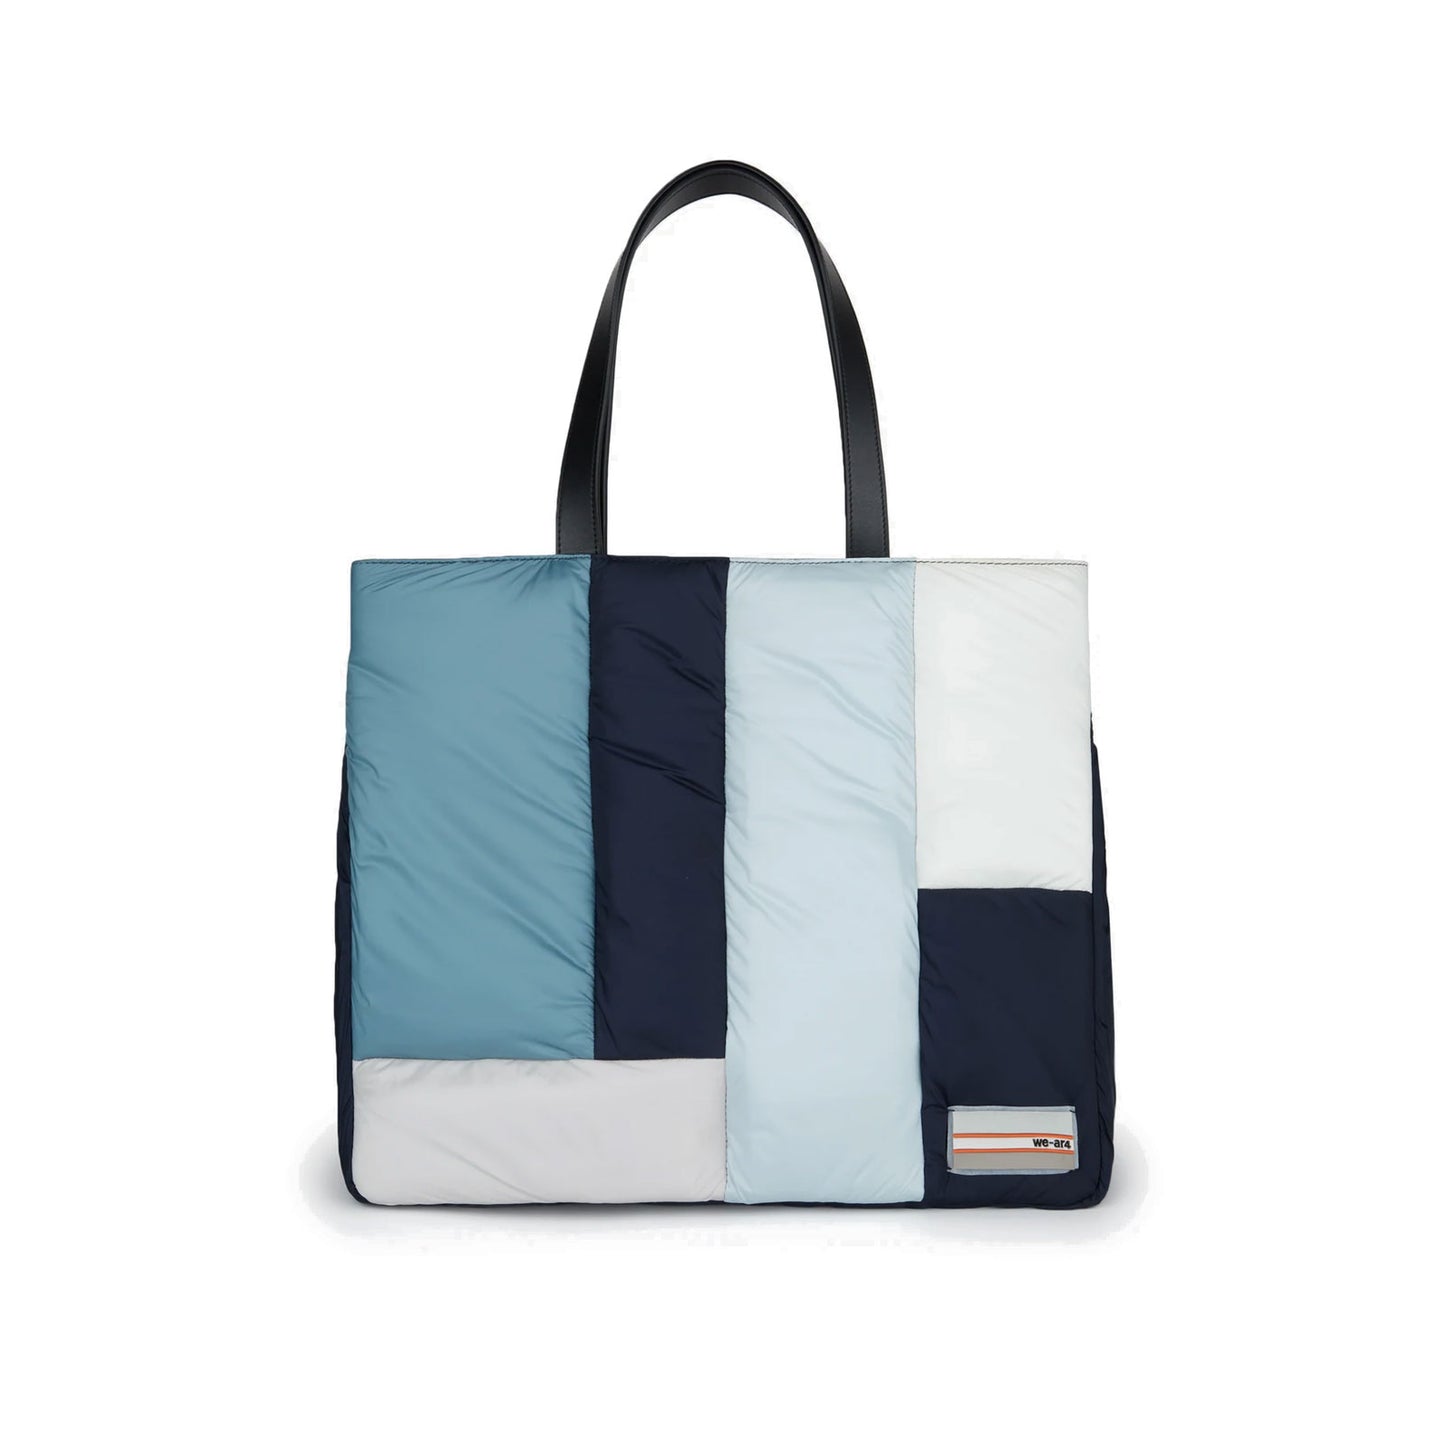 The Excess Tote Bag in Pale Blue Multi